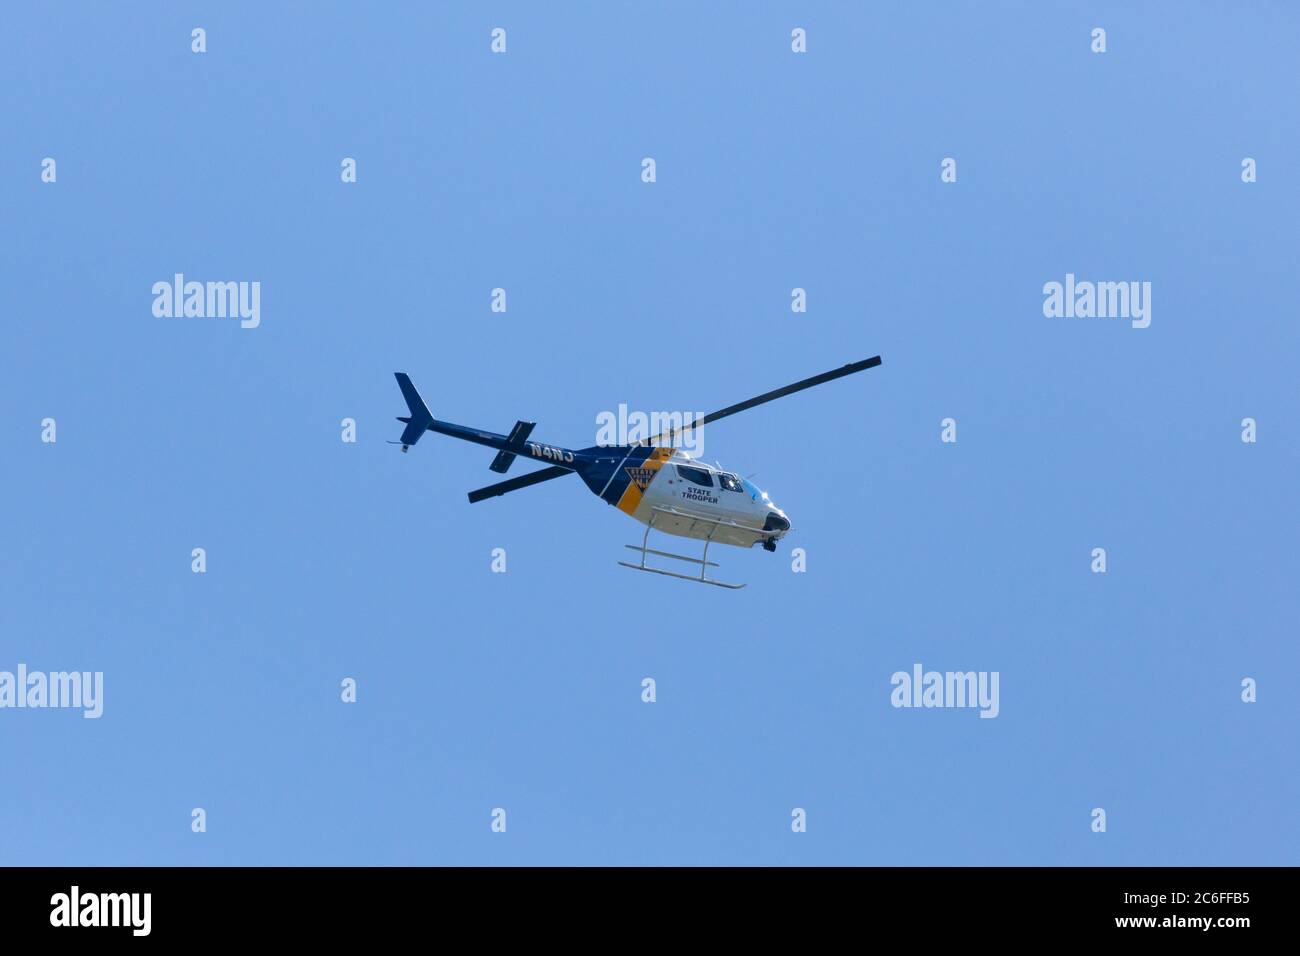 WOODBRIDGE, NEW JERSEY - June 1, 2020: A New Jersey State Police helicopter  circles the area during late spring Stock Photo - Alamy